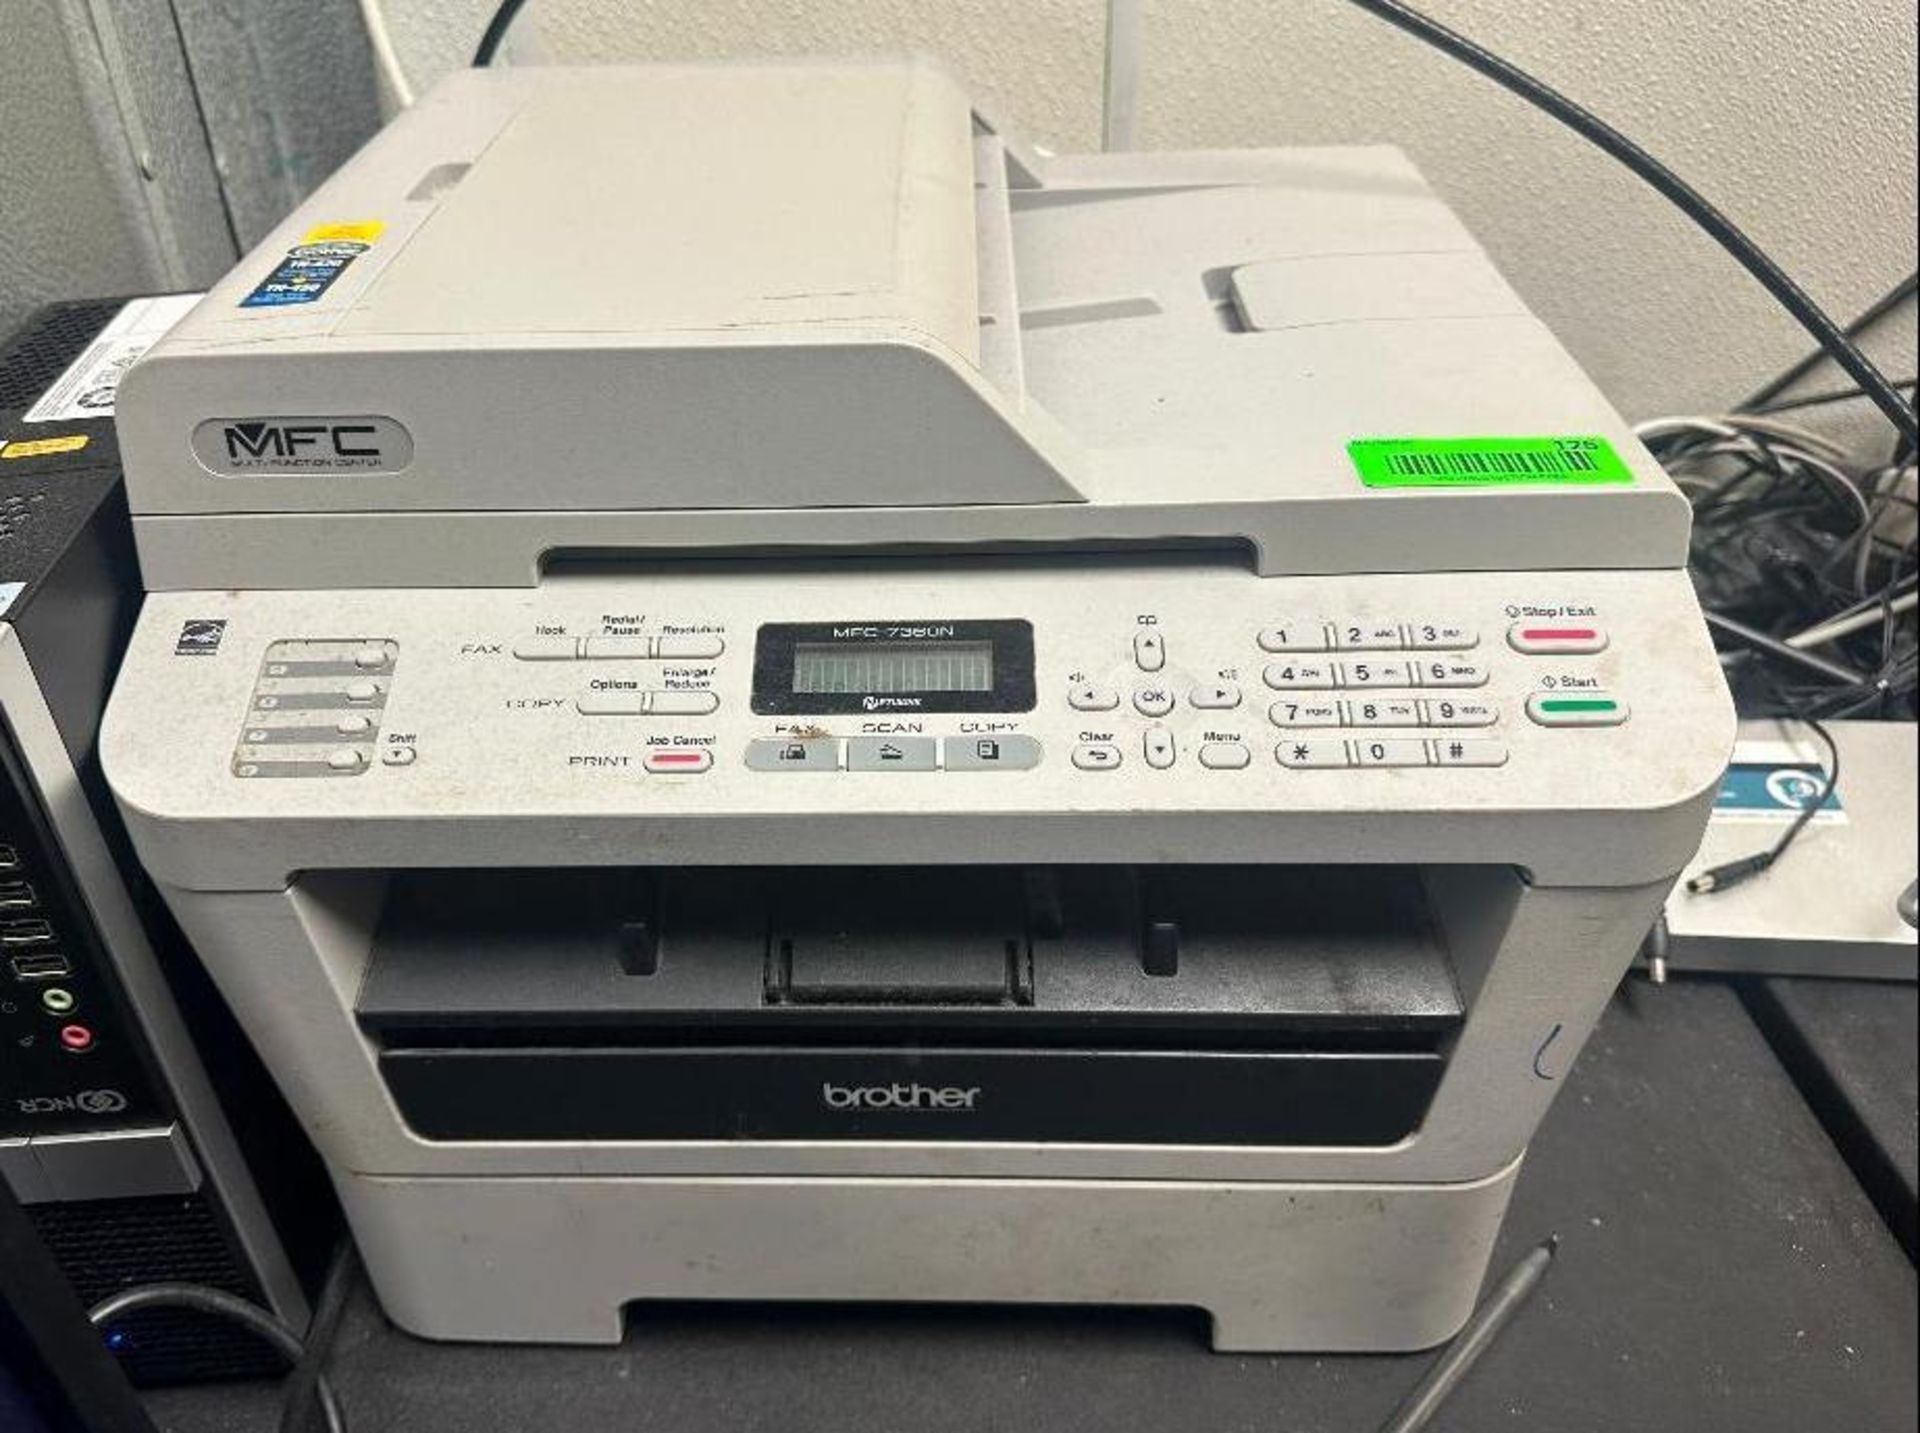 DESCRIPTION BROTHER MFC 7380N ALL IN ONE PRINTER BRAND / MODEL: BROTHER LOCATION 7399 O'Connor Drive